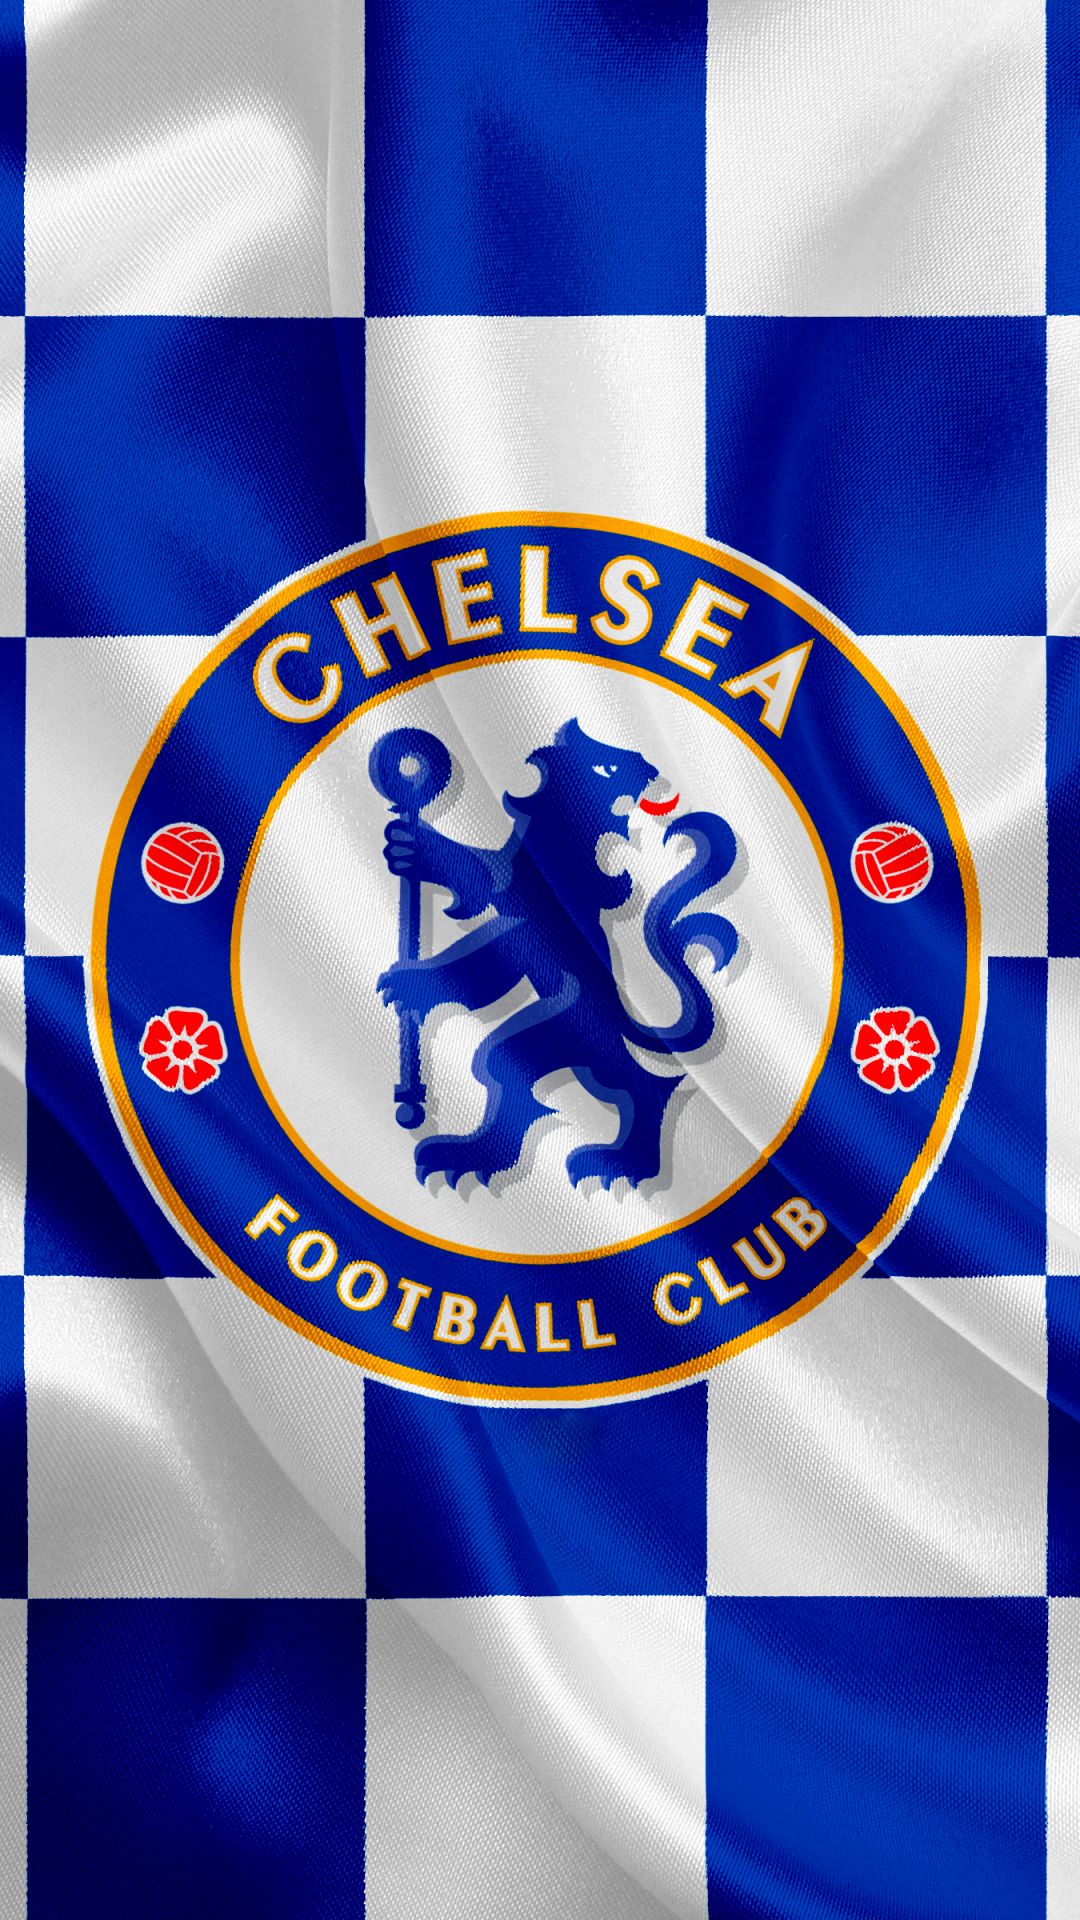 Chelsea Logo, Chelsea Fc Wallpaper Top Free Chelsea Fc Background, The current status of the logo is obsolete, which means the logo is not in use by the company anymore